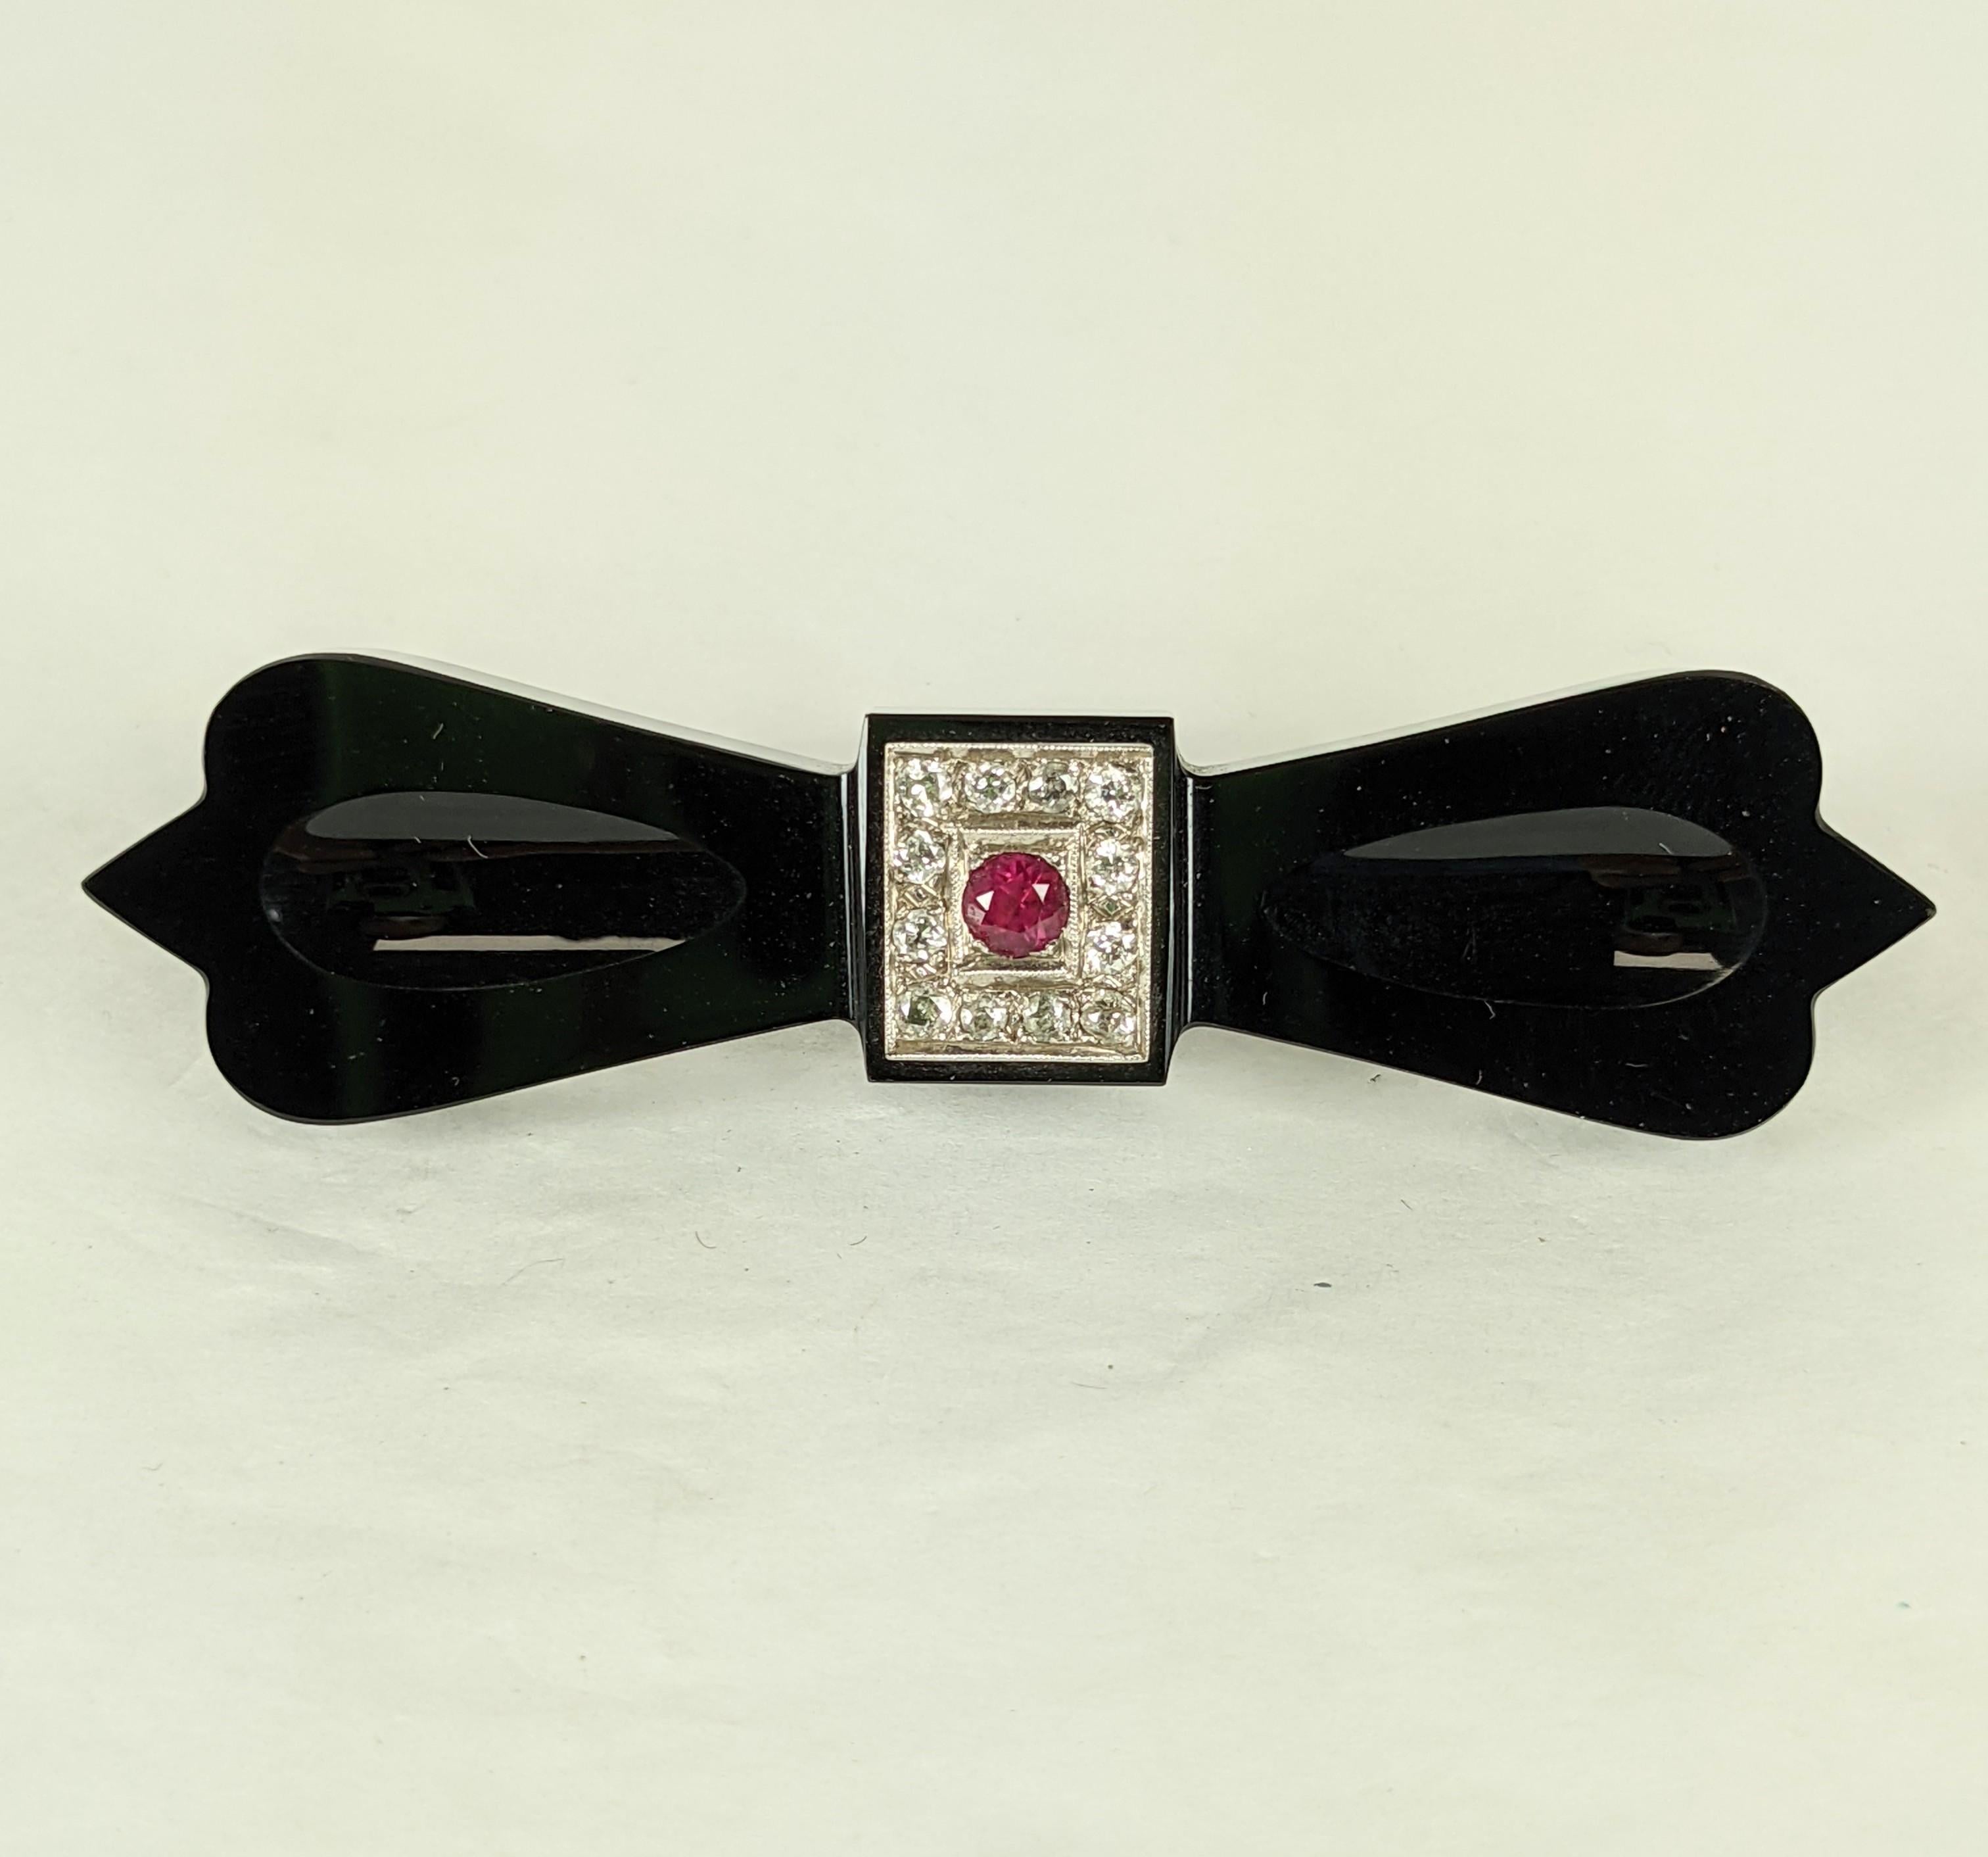 Onyx Diamond and Ruby Bow Brooch from the late 19th Century. A diamond and ruby motif has been added in the Art Deco period 40 years later. Fittings are in 14k gold. The is an effective period upcycling that adds a pop of color to a antique onyx